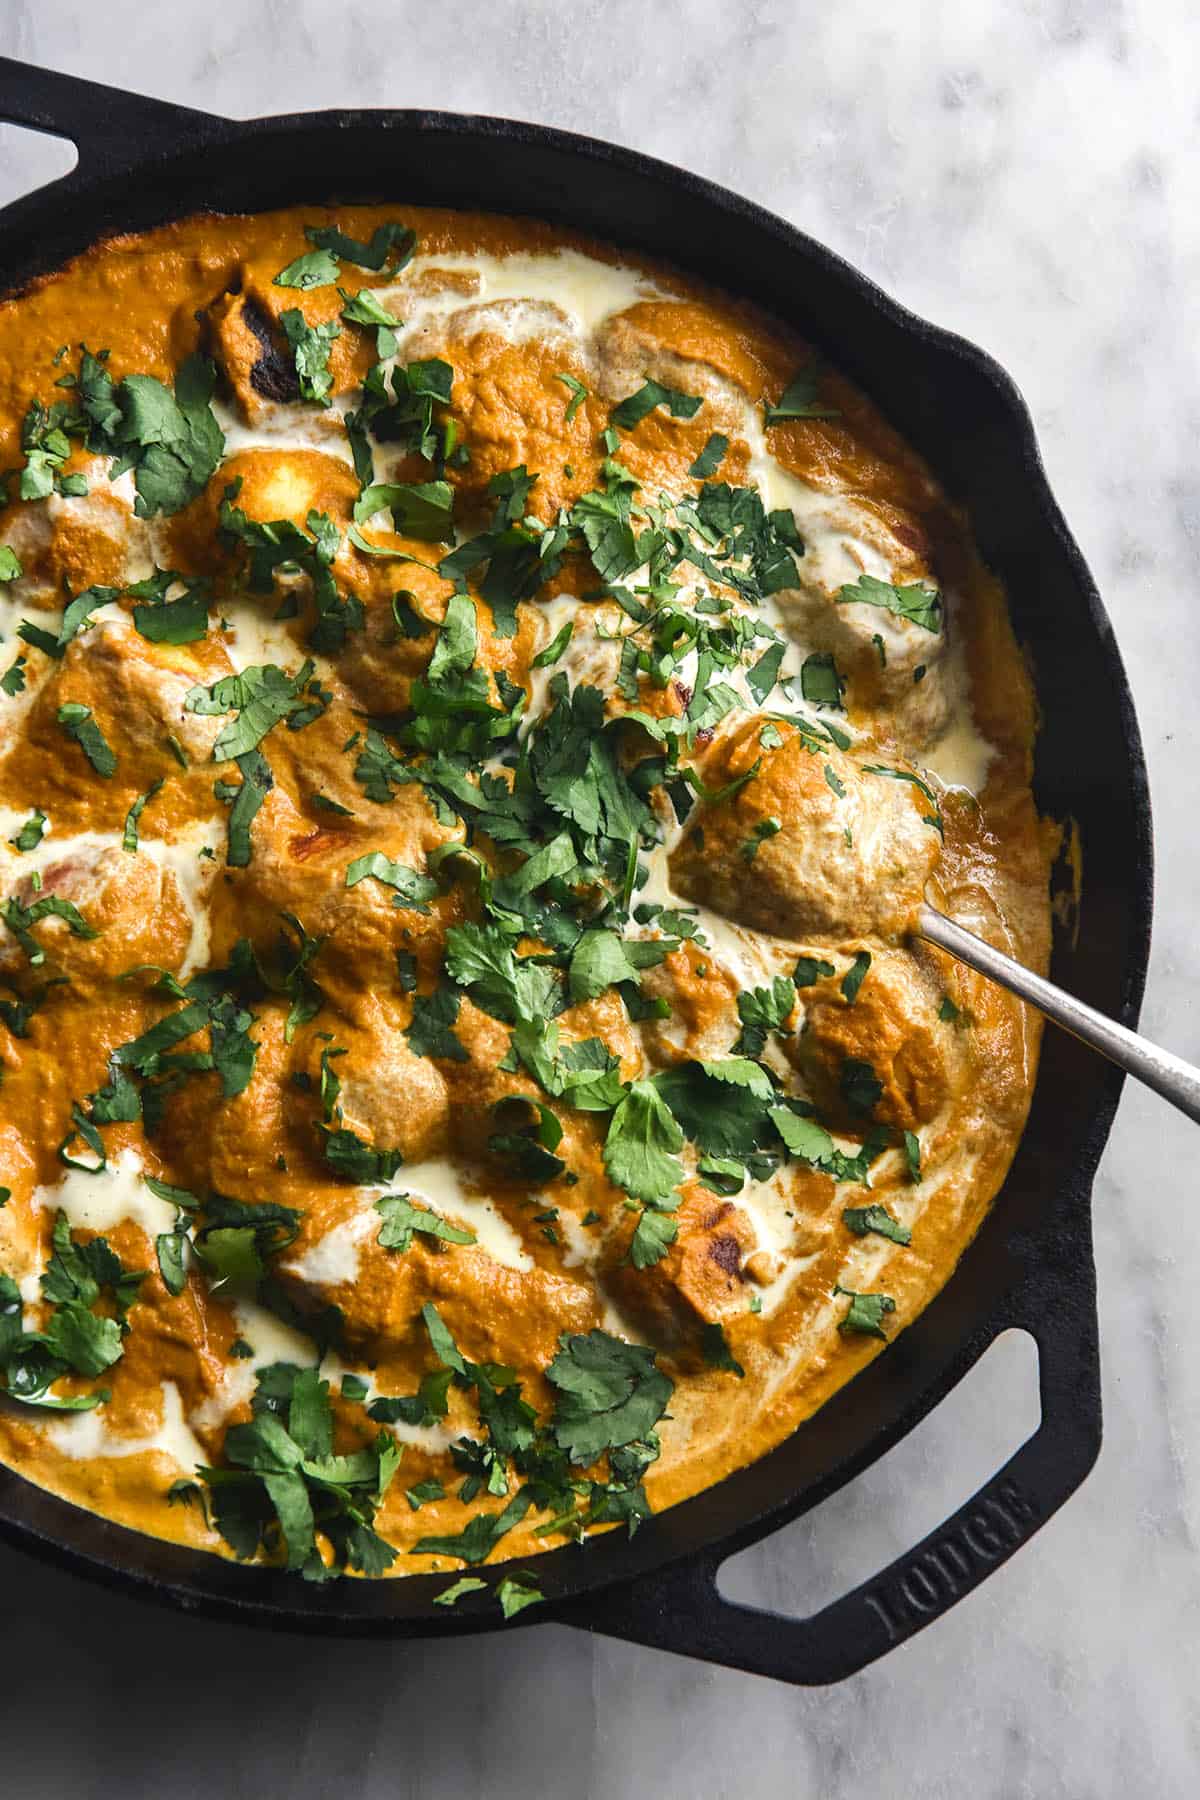 An aerial view of a skillet filled with FODMAP friendly Malai Kofta and topped with drizzled cream and chopped coriander. A spoon pokes out to the bottom left of the skillet, which sits on a white marble table